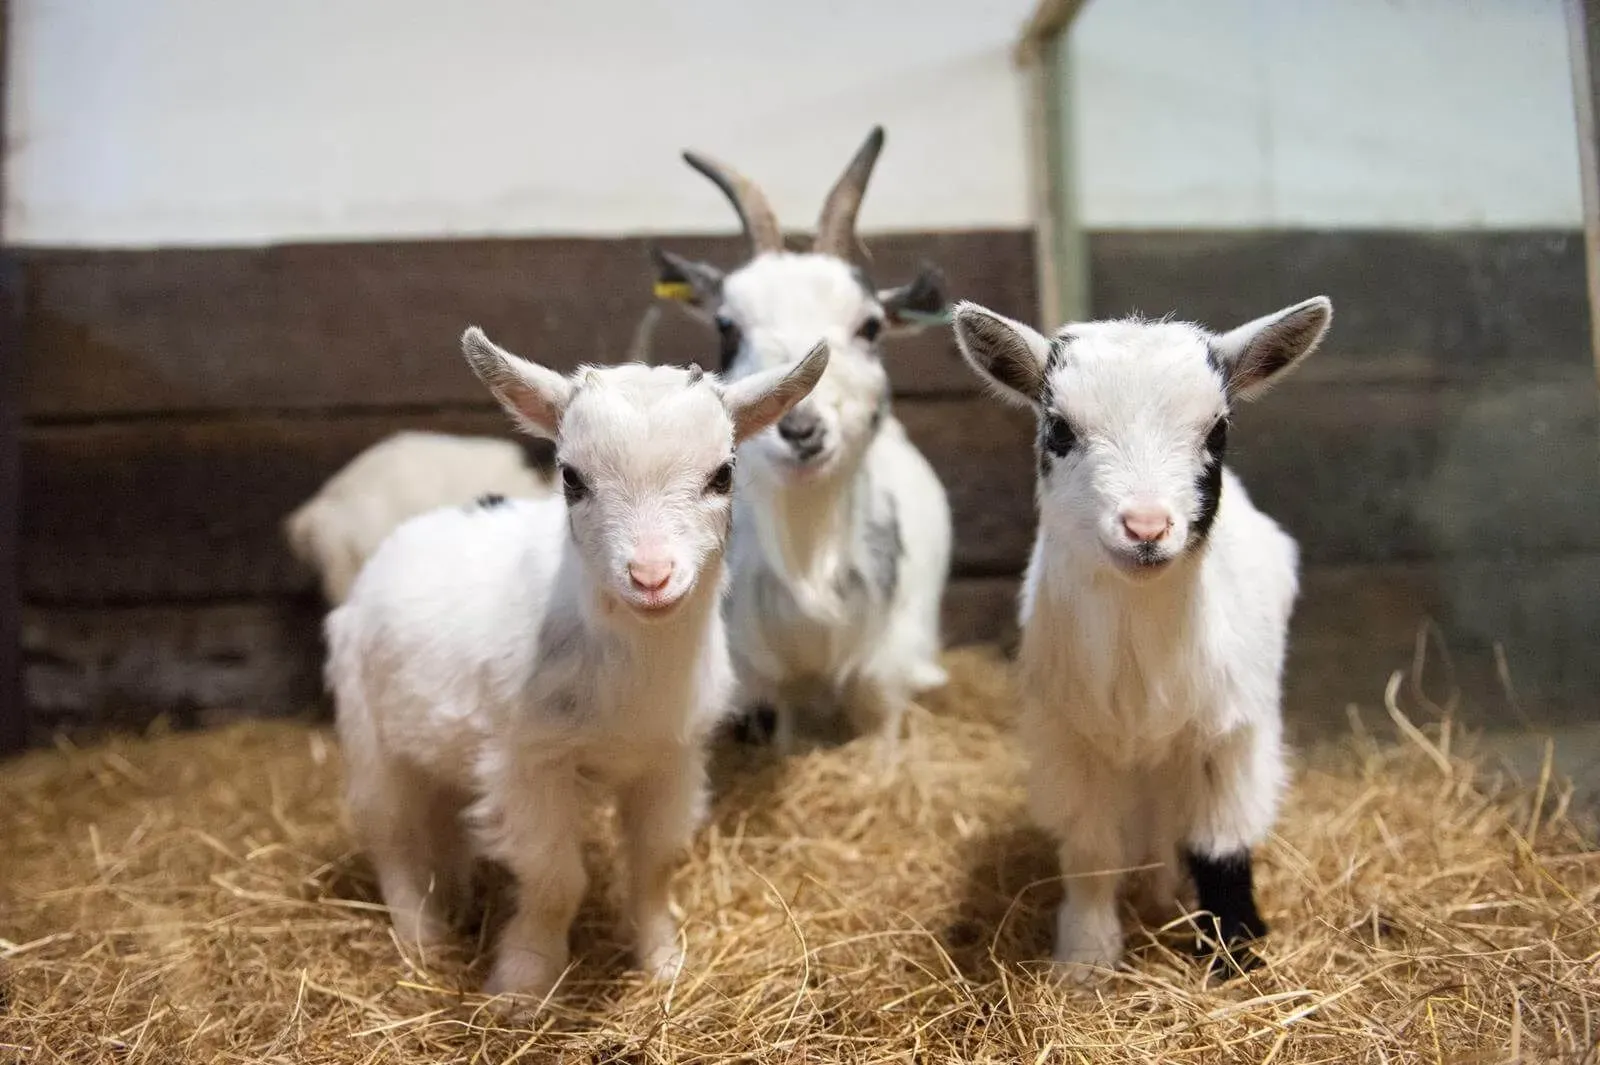 Three white baby goats, two with horns, looking at the camera among the hay in a barn at Wetheriggs Zoo & Animal Sanctuary.